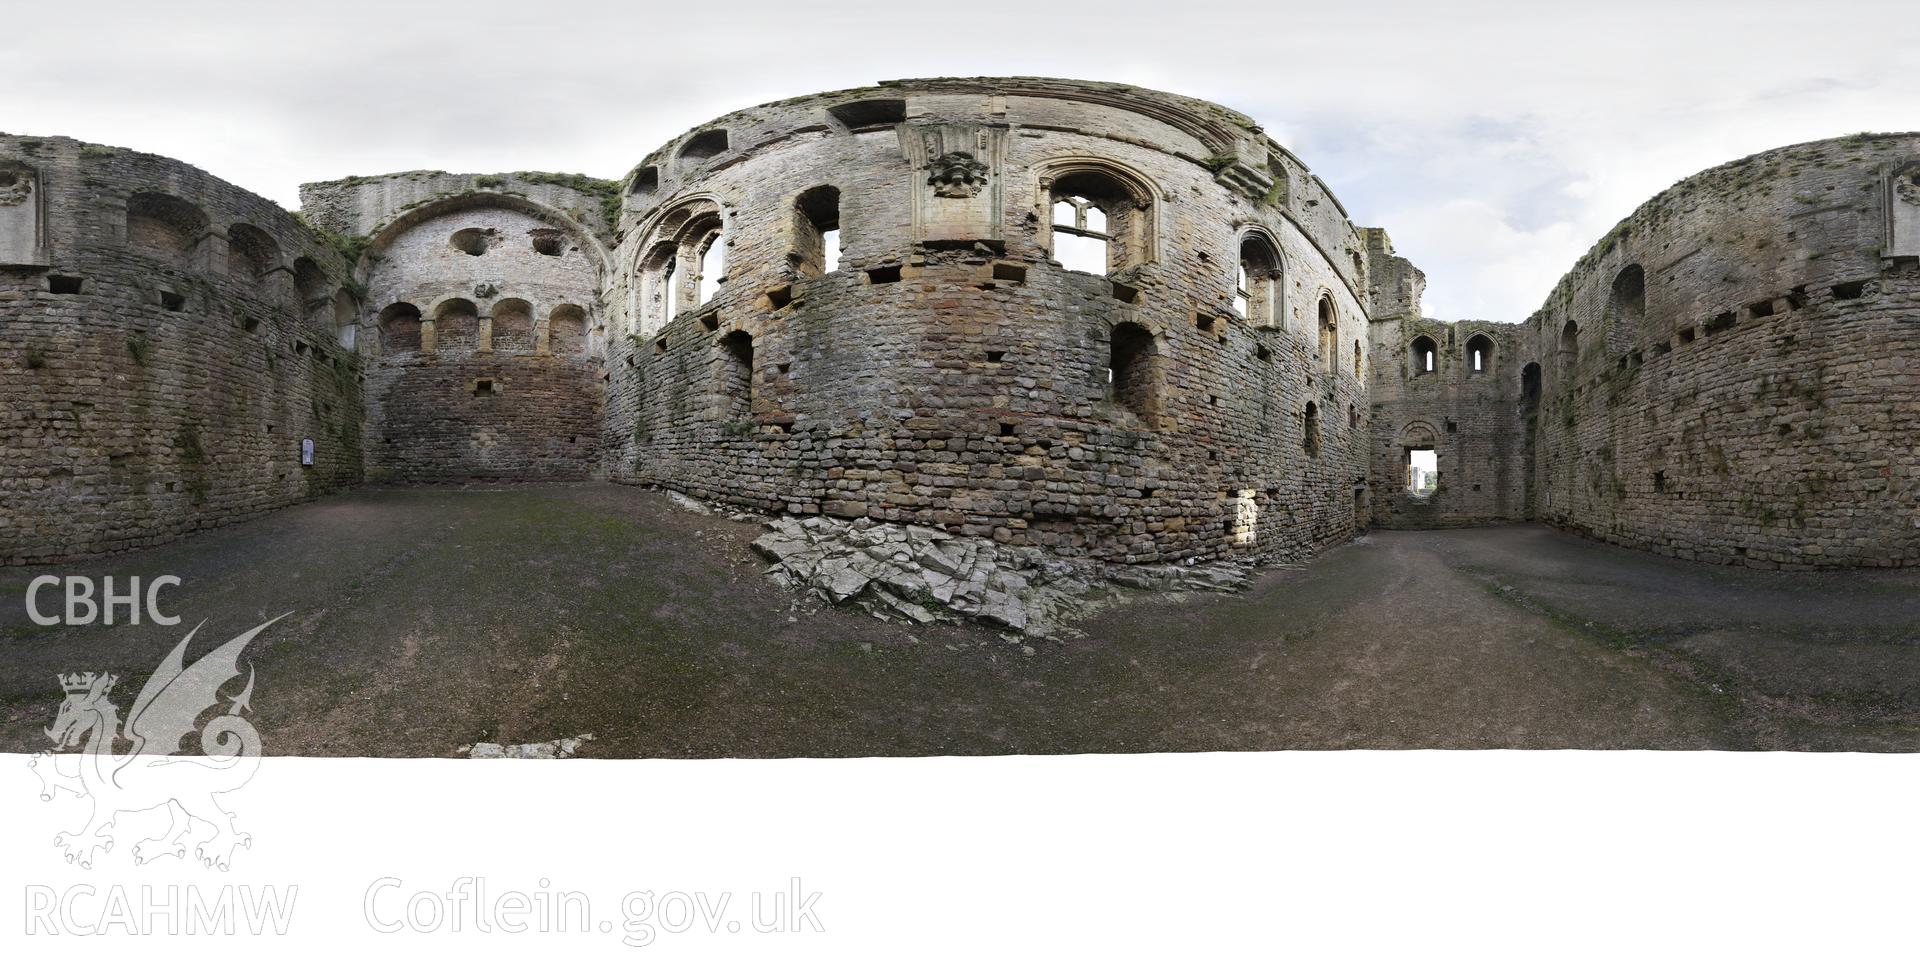 Reduced resolution tiff of stitched images from the Hall at Chepstow Castle, produced by Susan Fielding and Rita Singer, July 2017. Produced through European Travellers to Wales project.